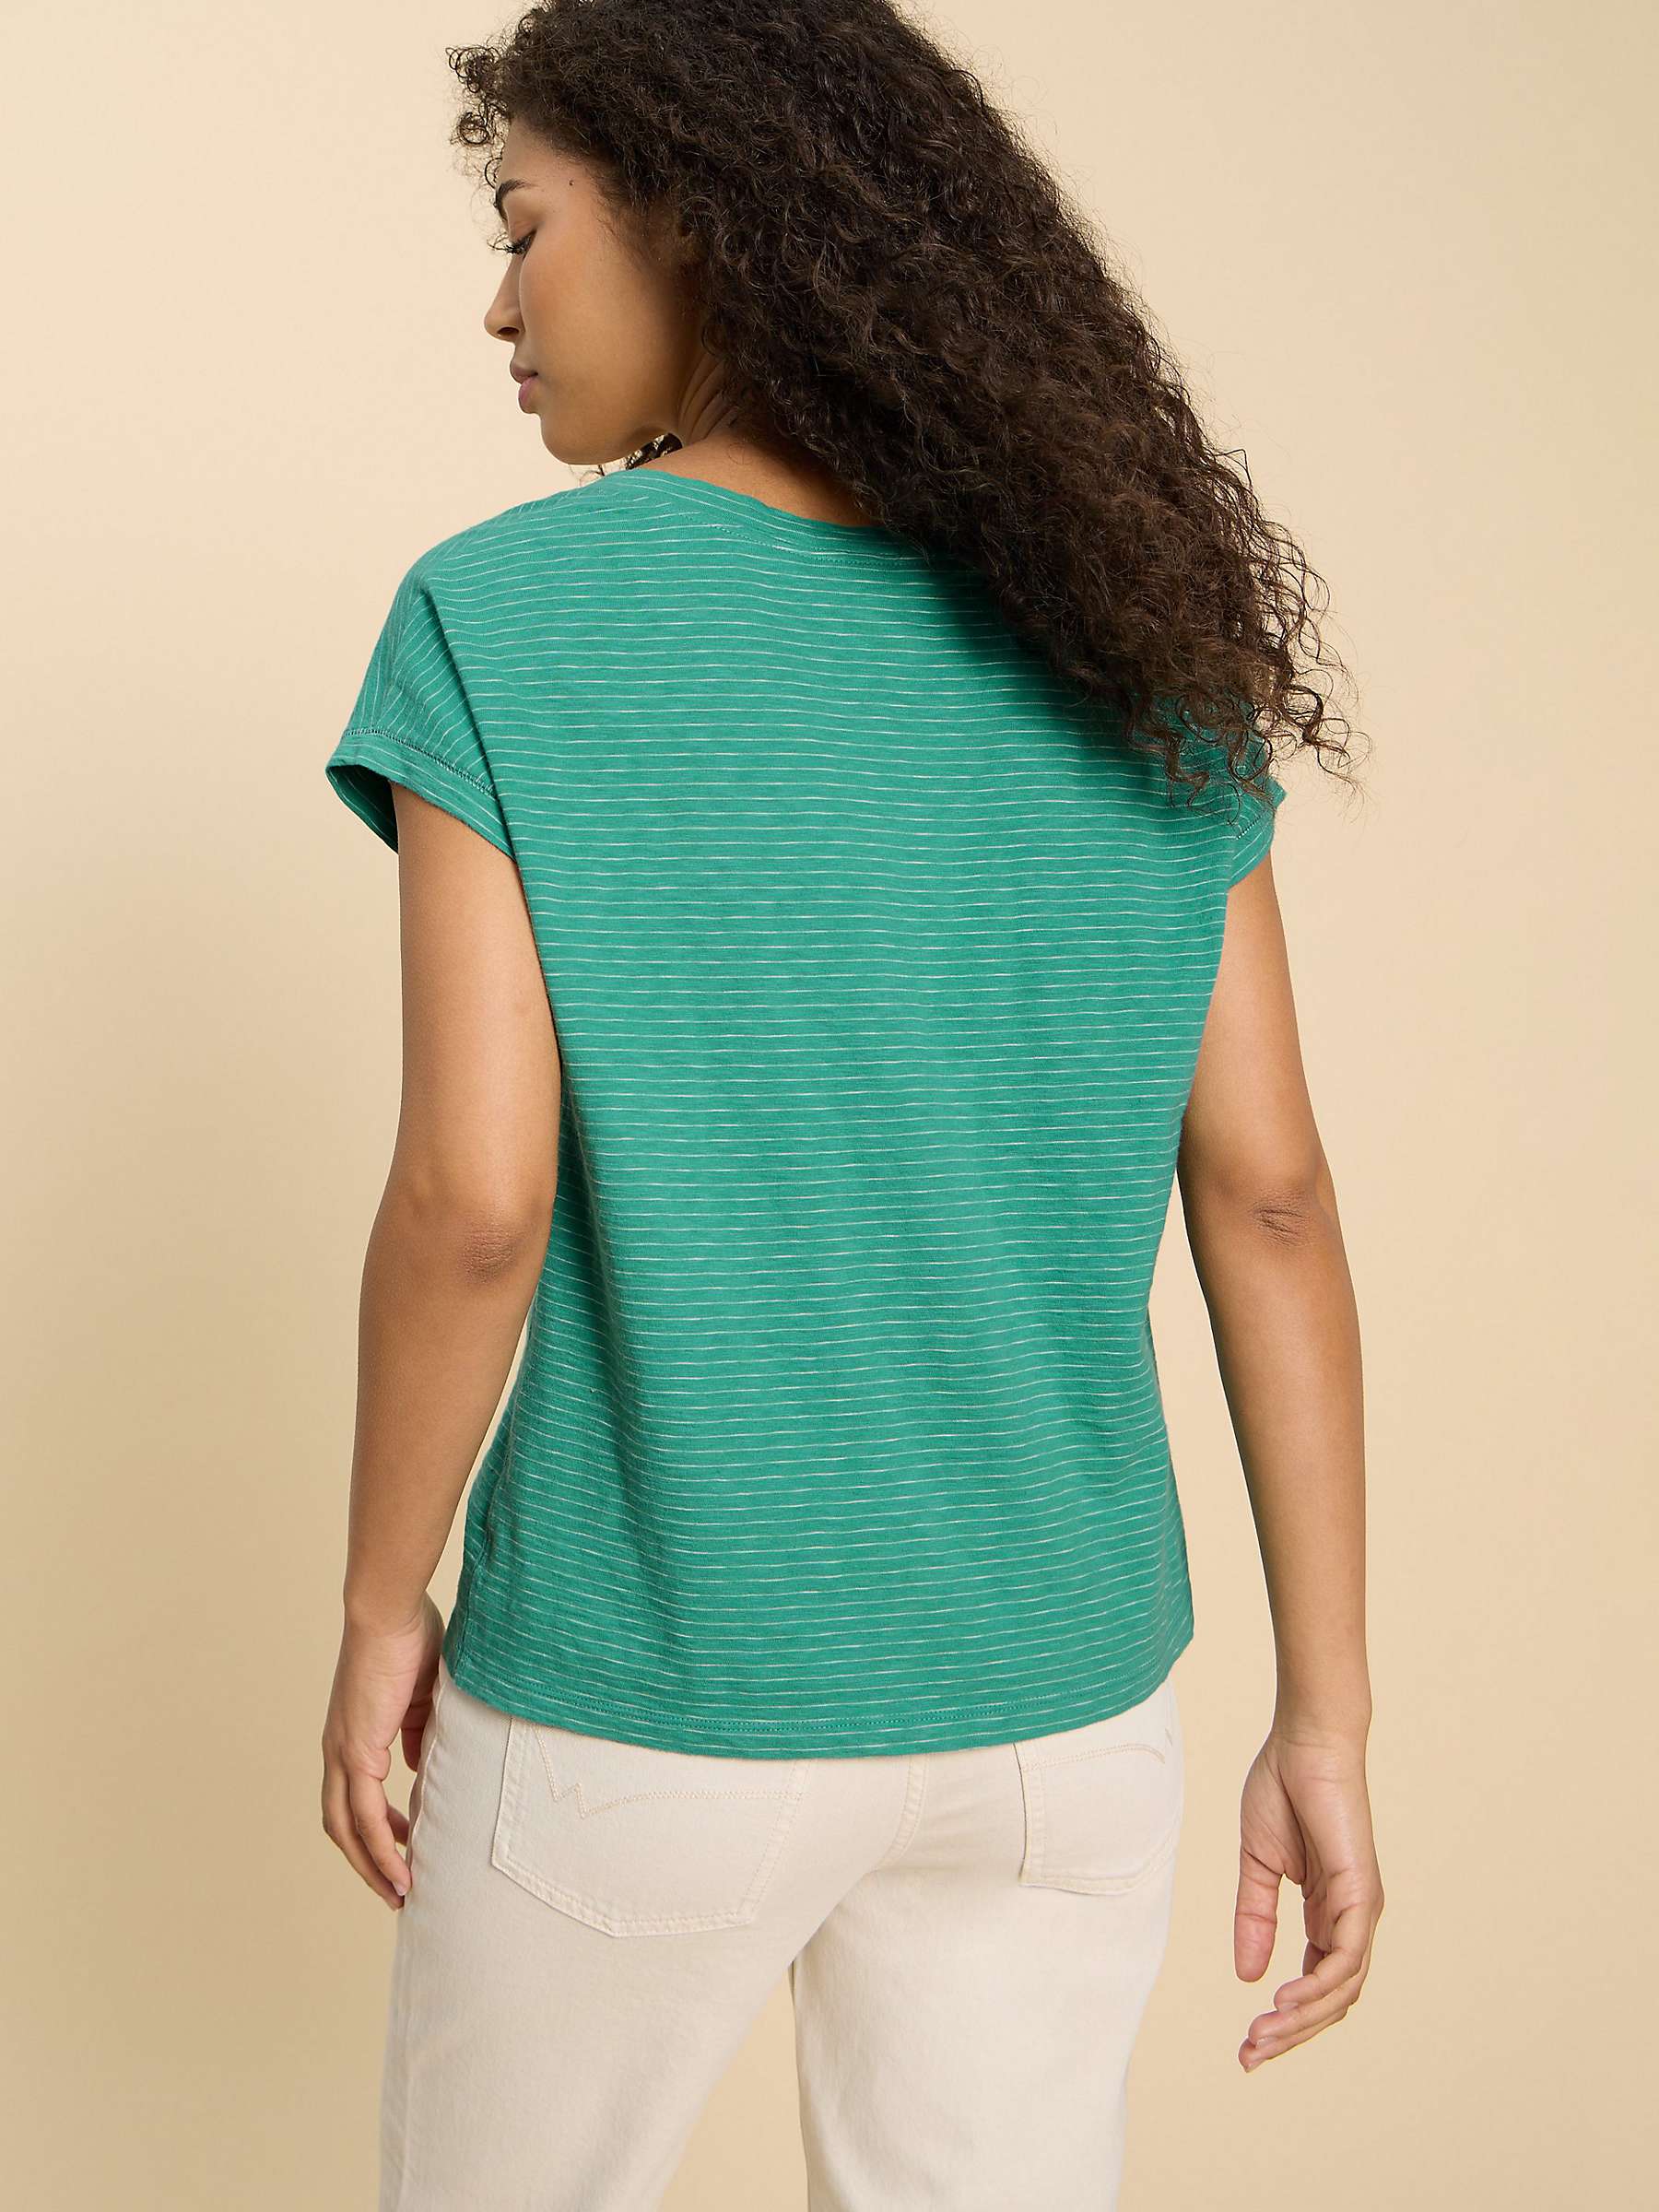 Buy White Stuff Nelly Stripe T-Shirt, Teal/Multi Online at johnlewis.com